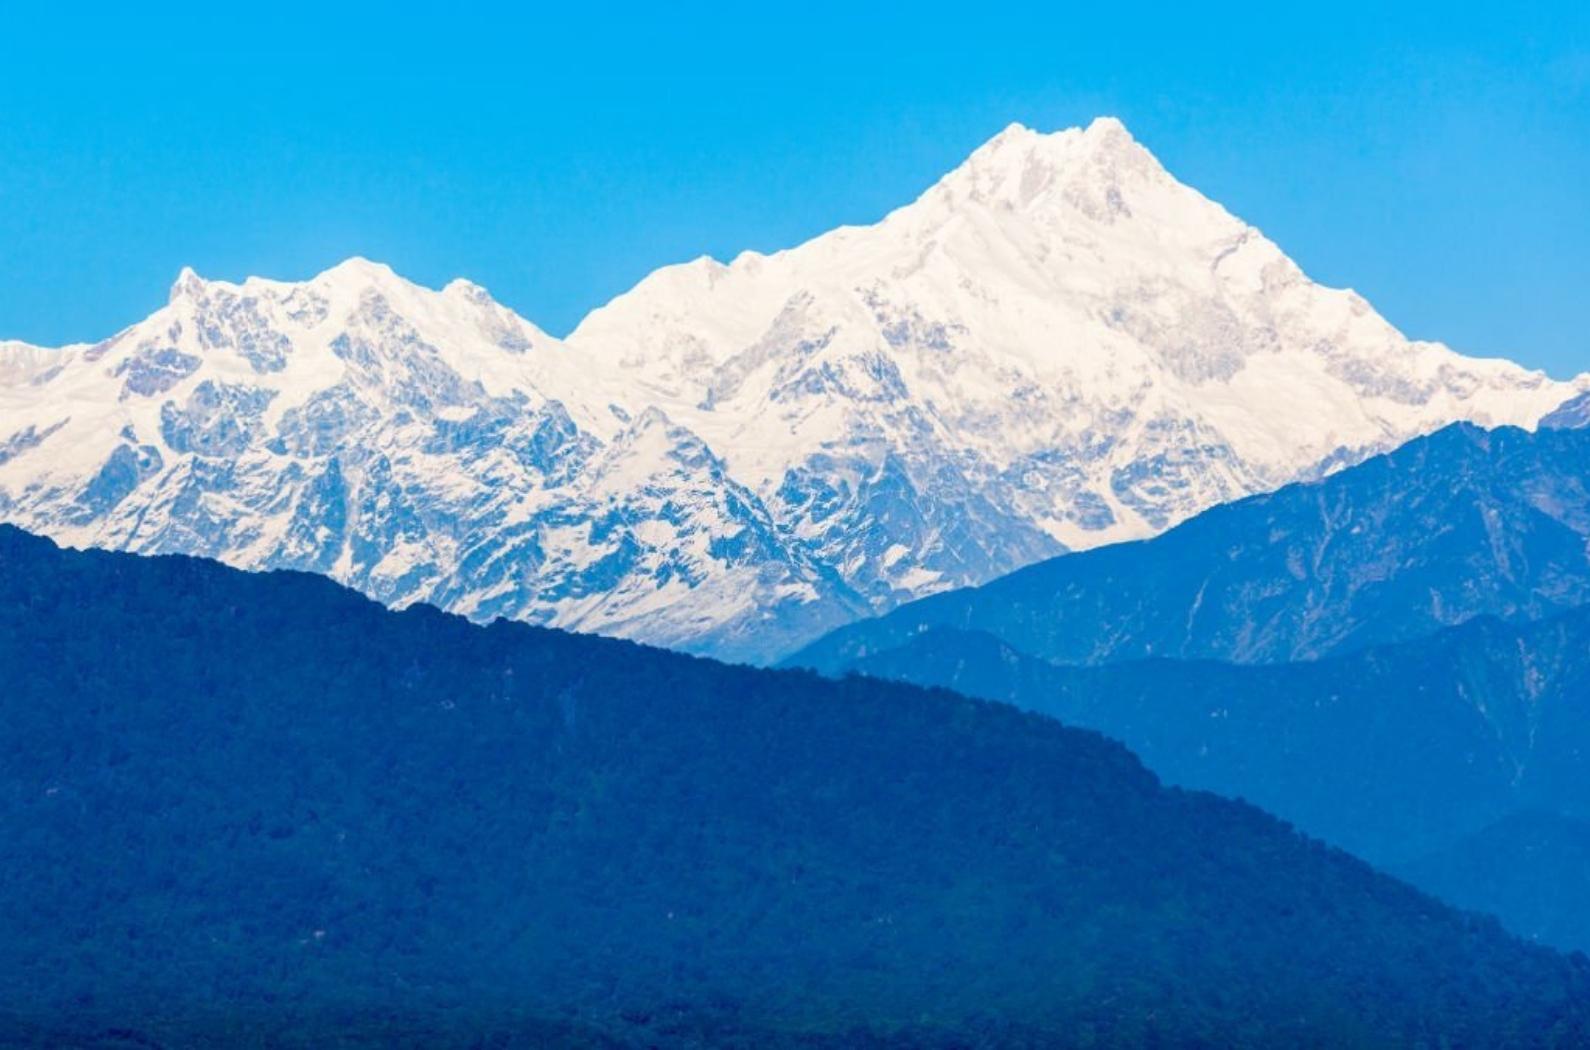 Kangchenjunga is the third highest mountain in the world, and lies partly in Nepal and partly in Sikkim.